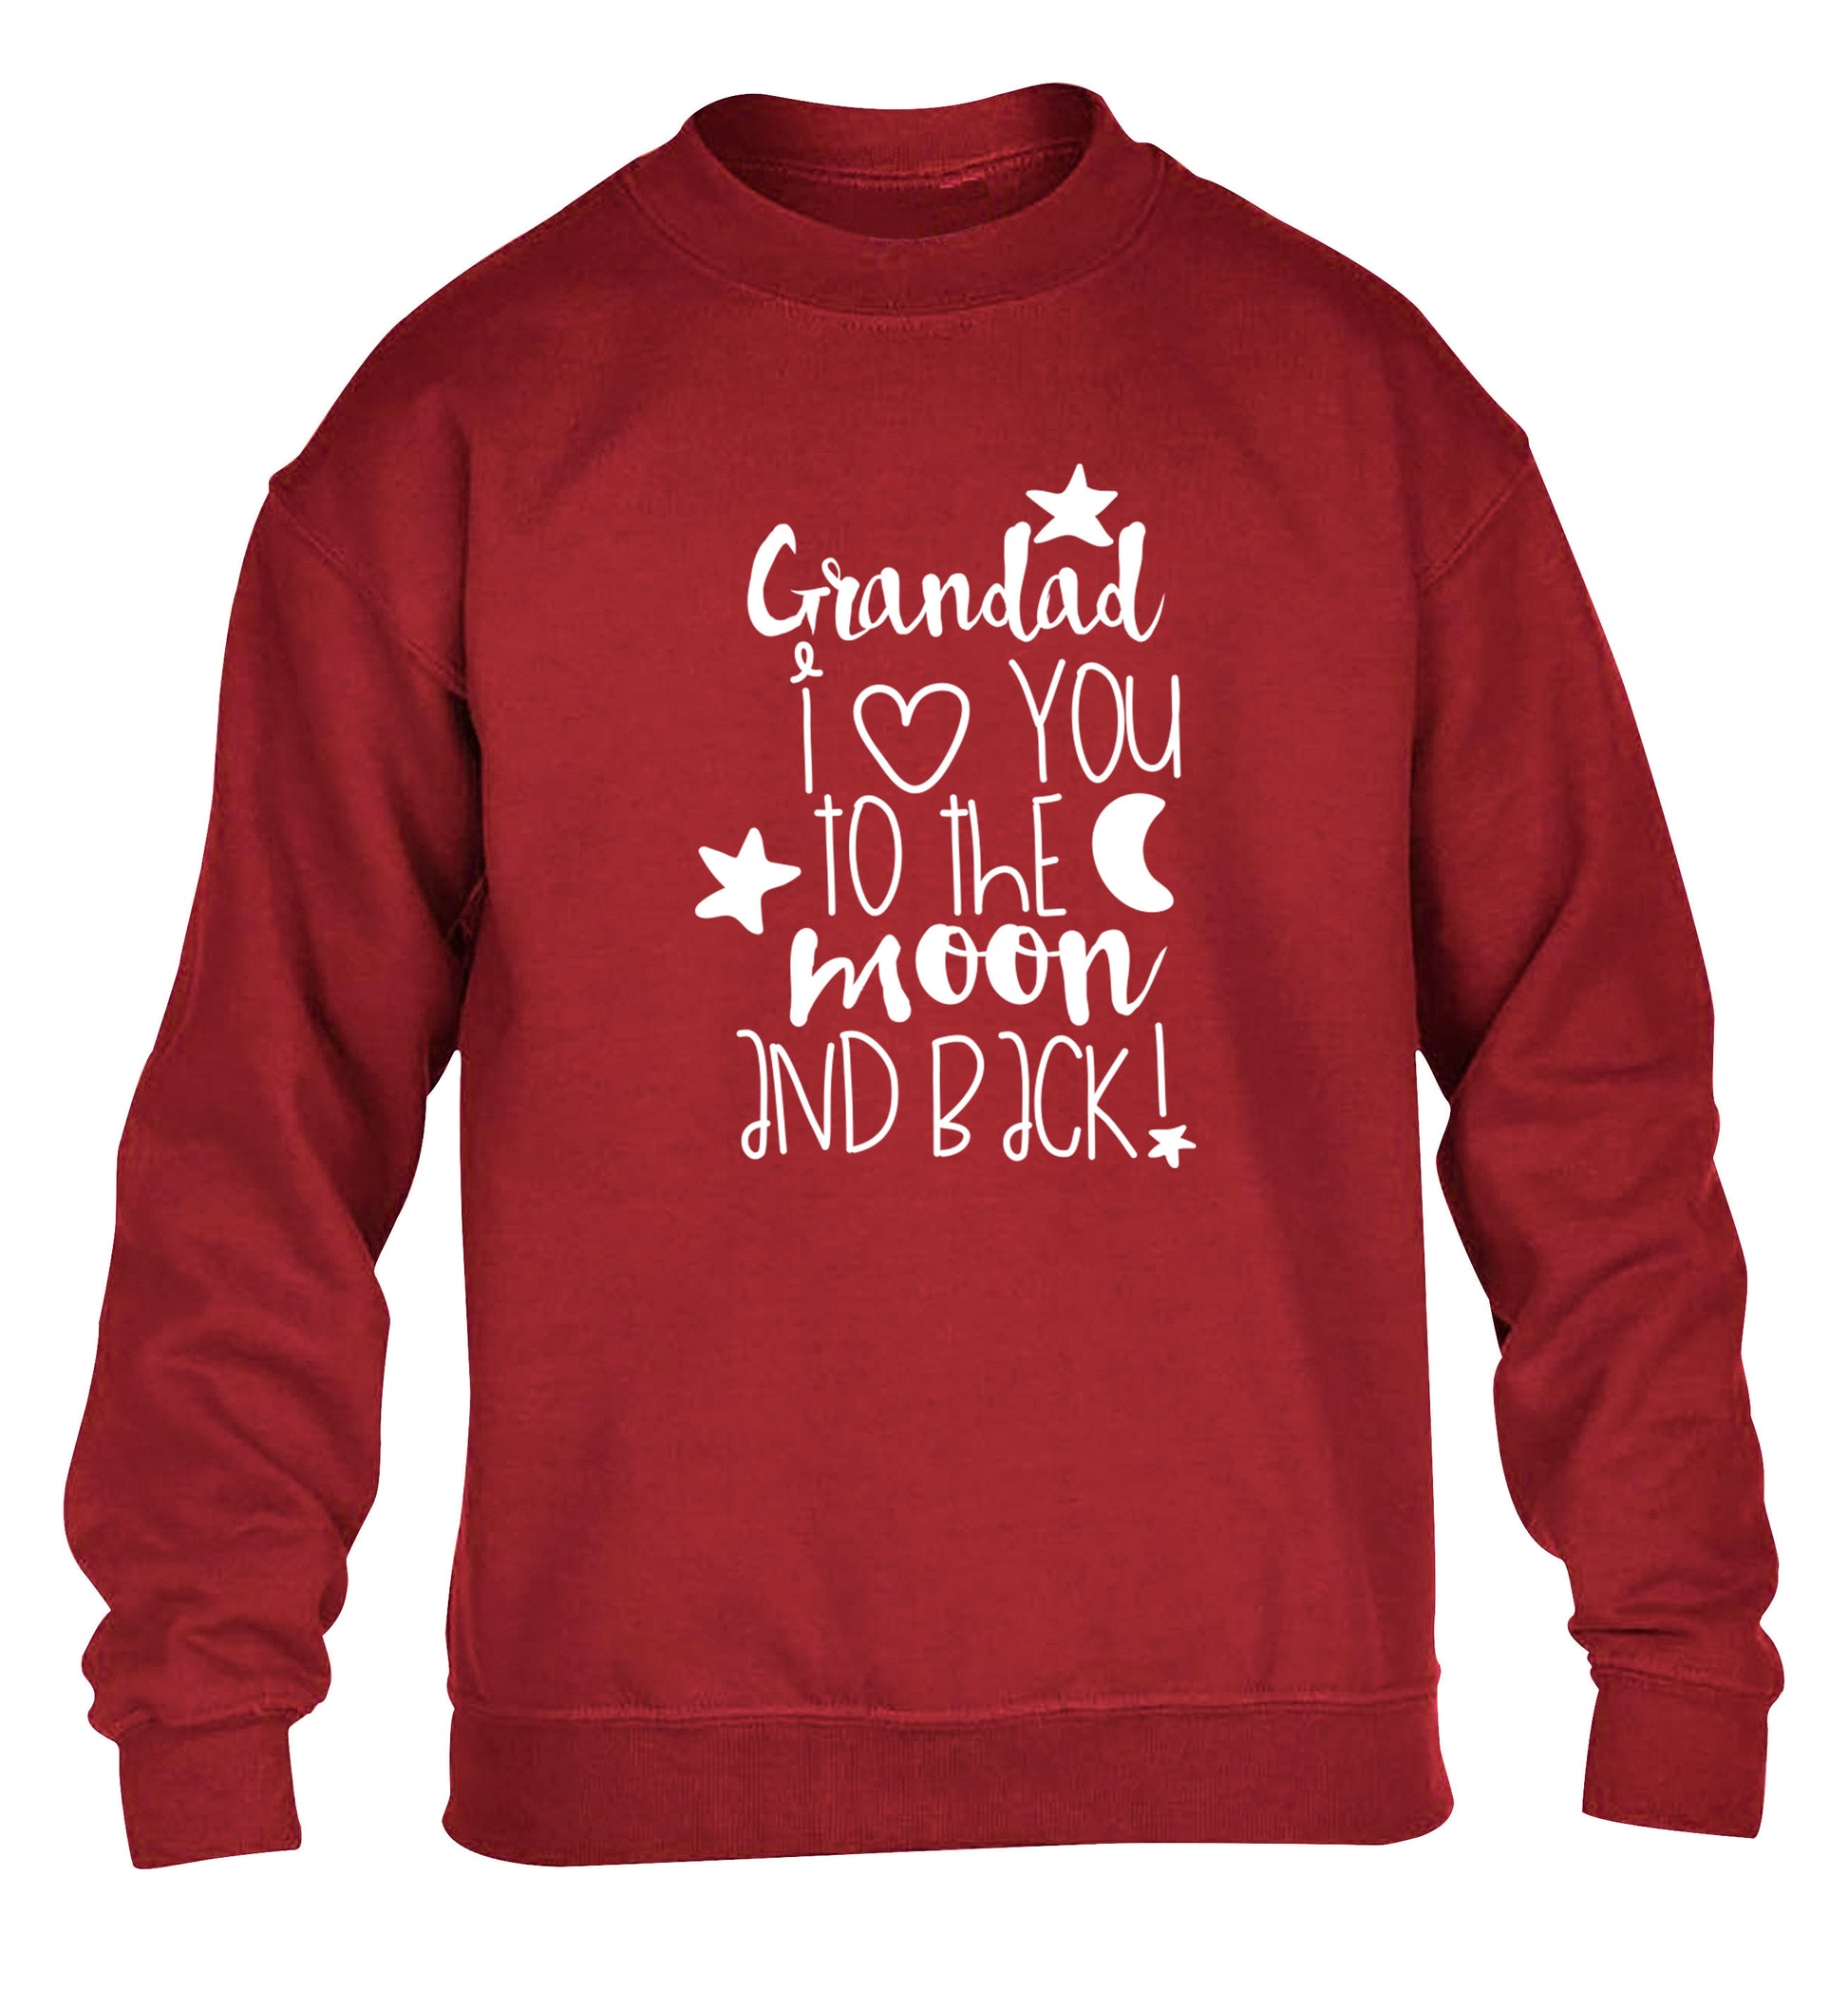 Grandad's I love you to the moon and back children's grey  sweater 12-14 Years